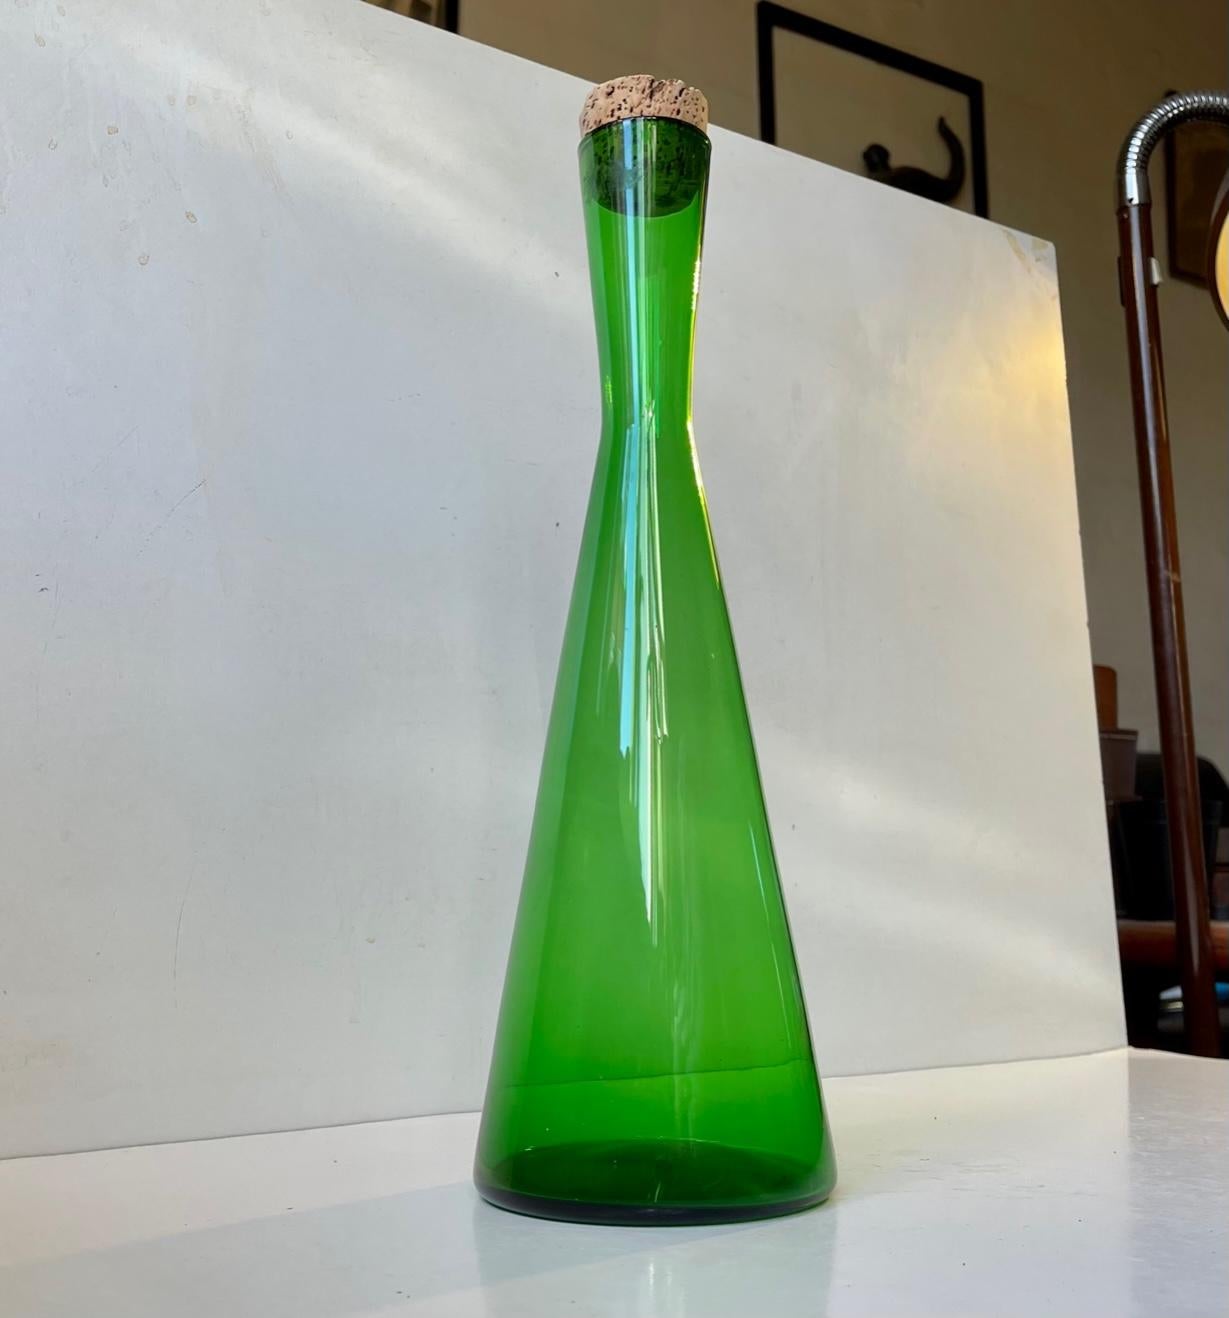 Green hand-blown Winston decanter designed in 1956 by Per Lütken. Manufactured at Holmegaard in Denmark between 1956-65. Its very rare featuring its original cork stopper. Measurements: height: 36.5/34.5 cm, diameter: 11 cm. It can contain approx. 1